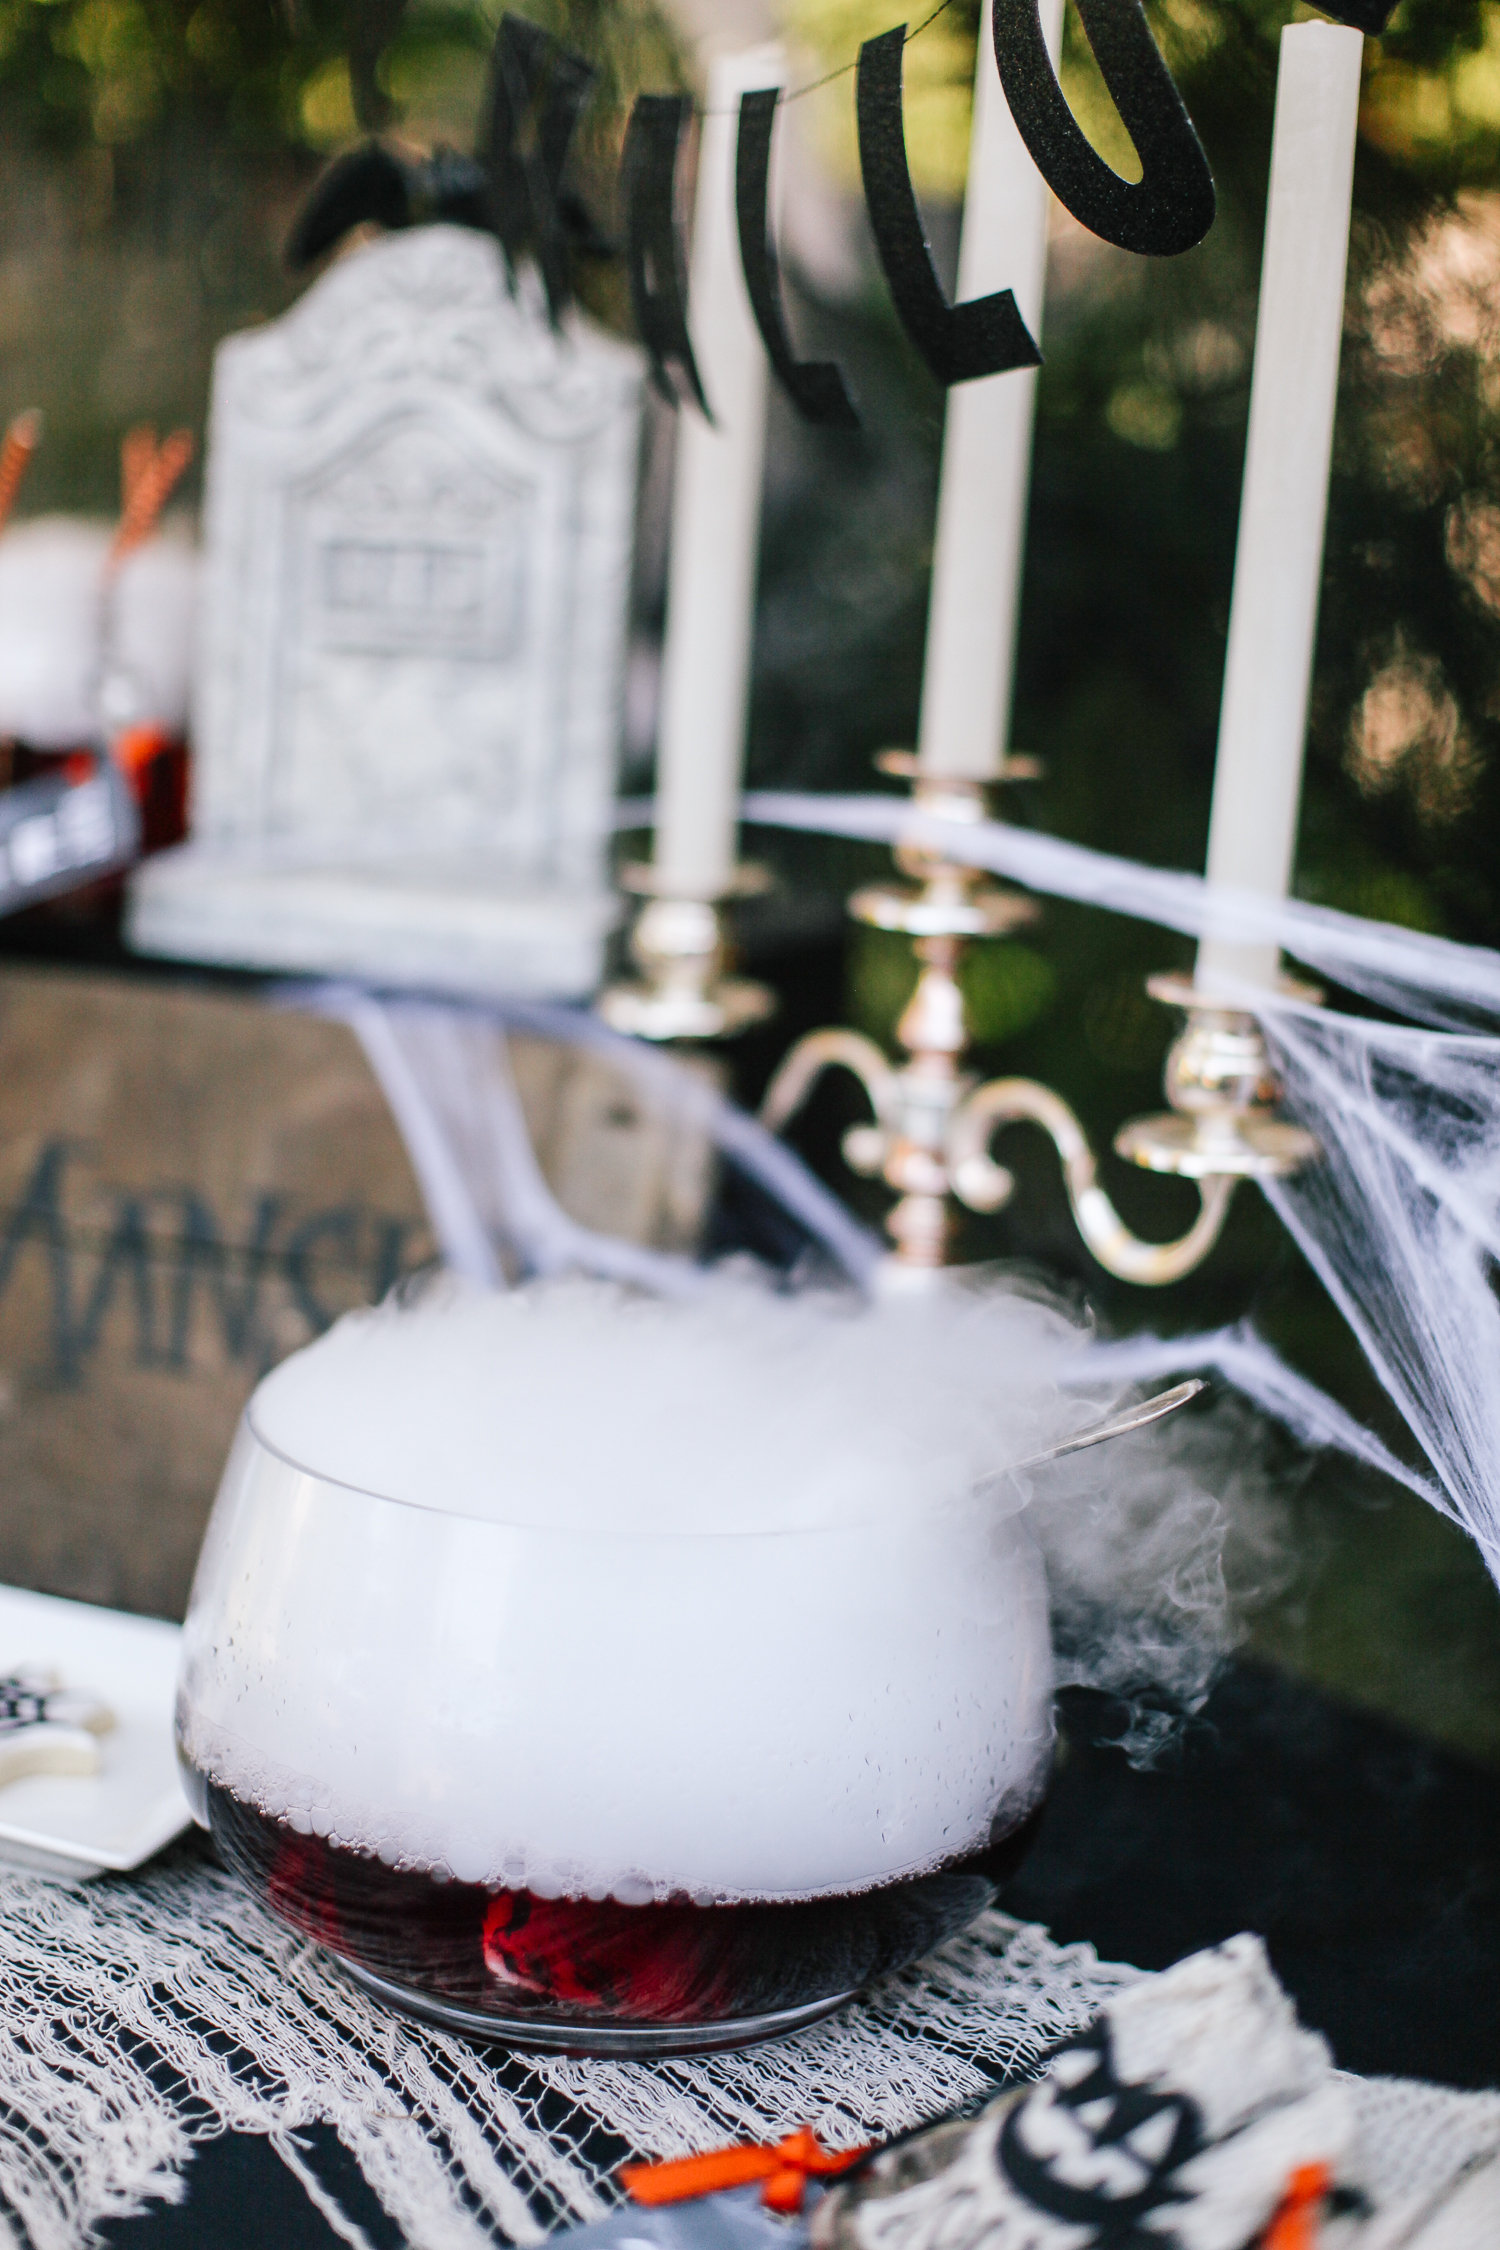 Dry ice is the coolest way to serve Halloween punch. Kids and adults are delighted by the extra creepy fog that surrounds the bowl!